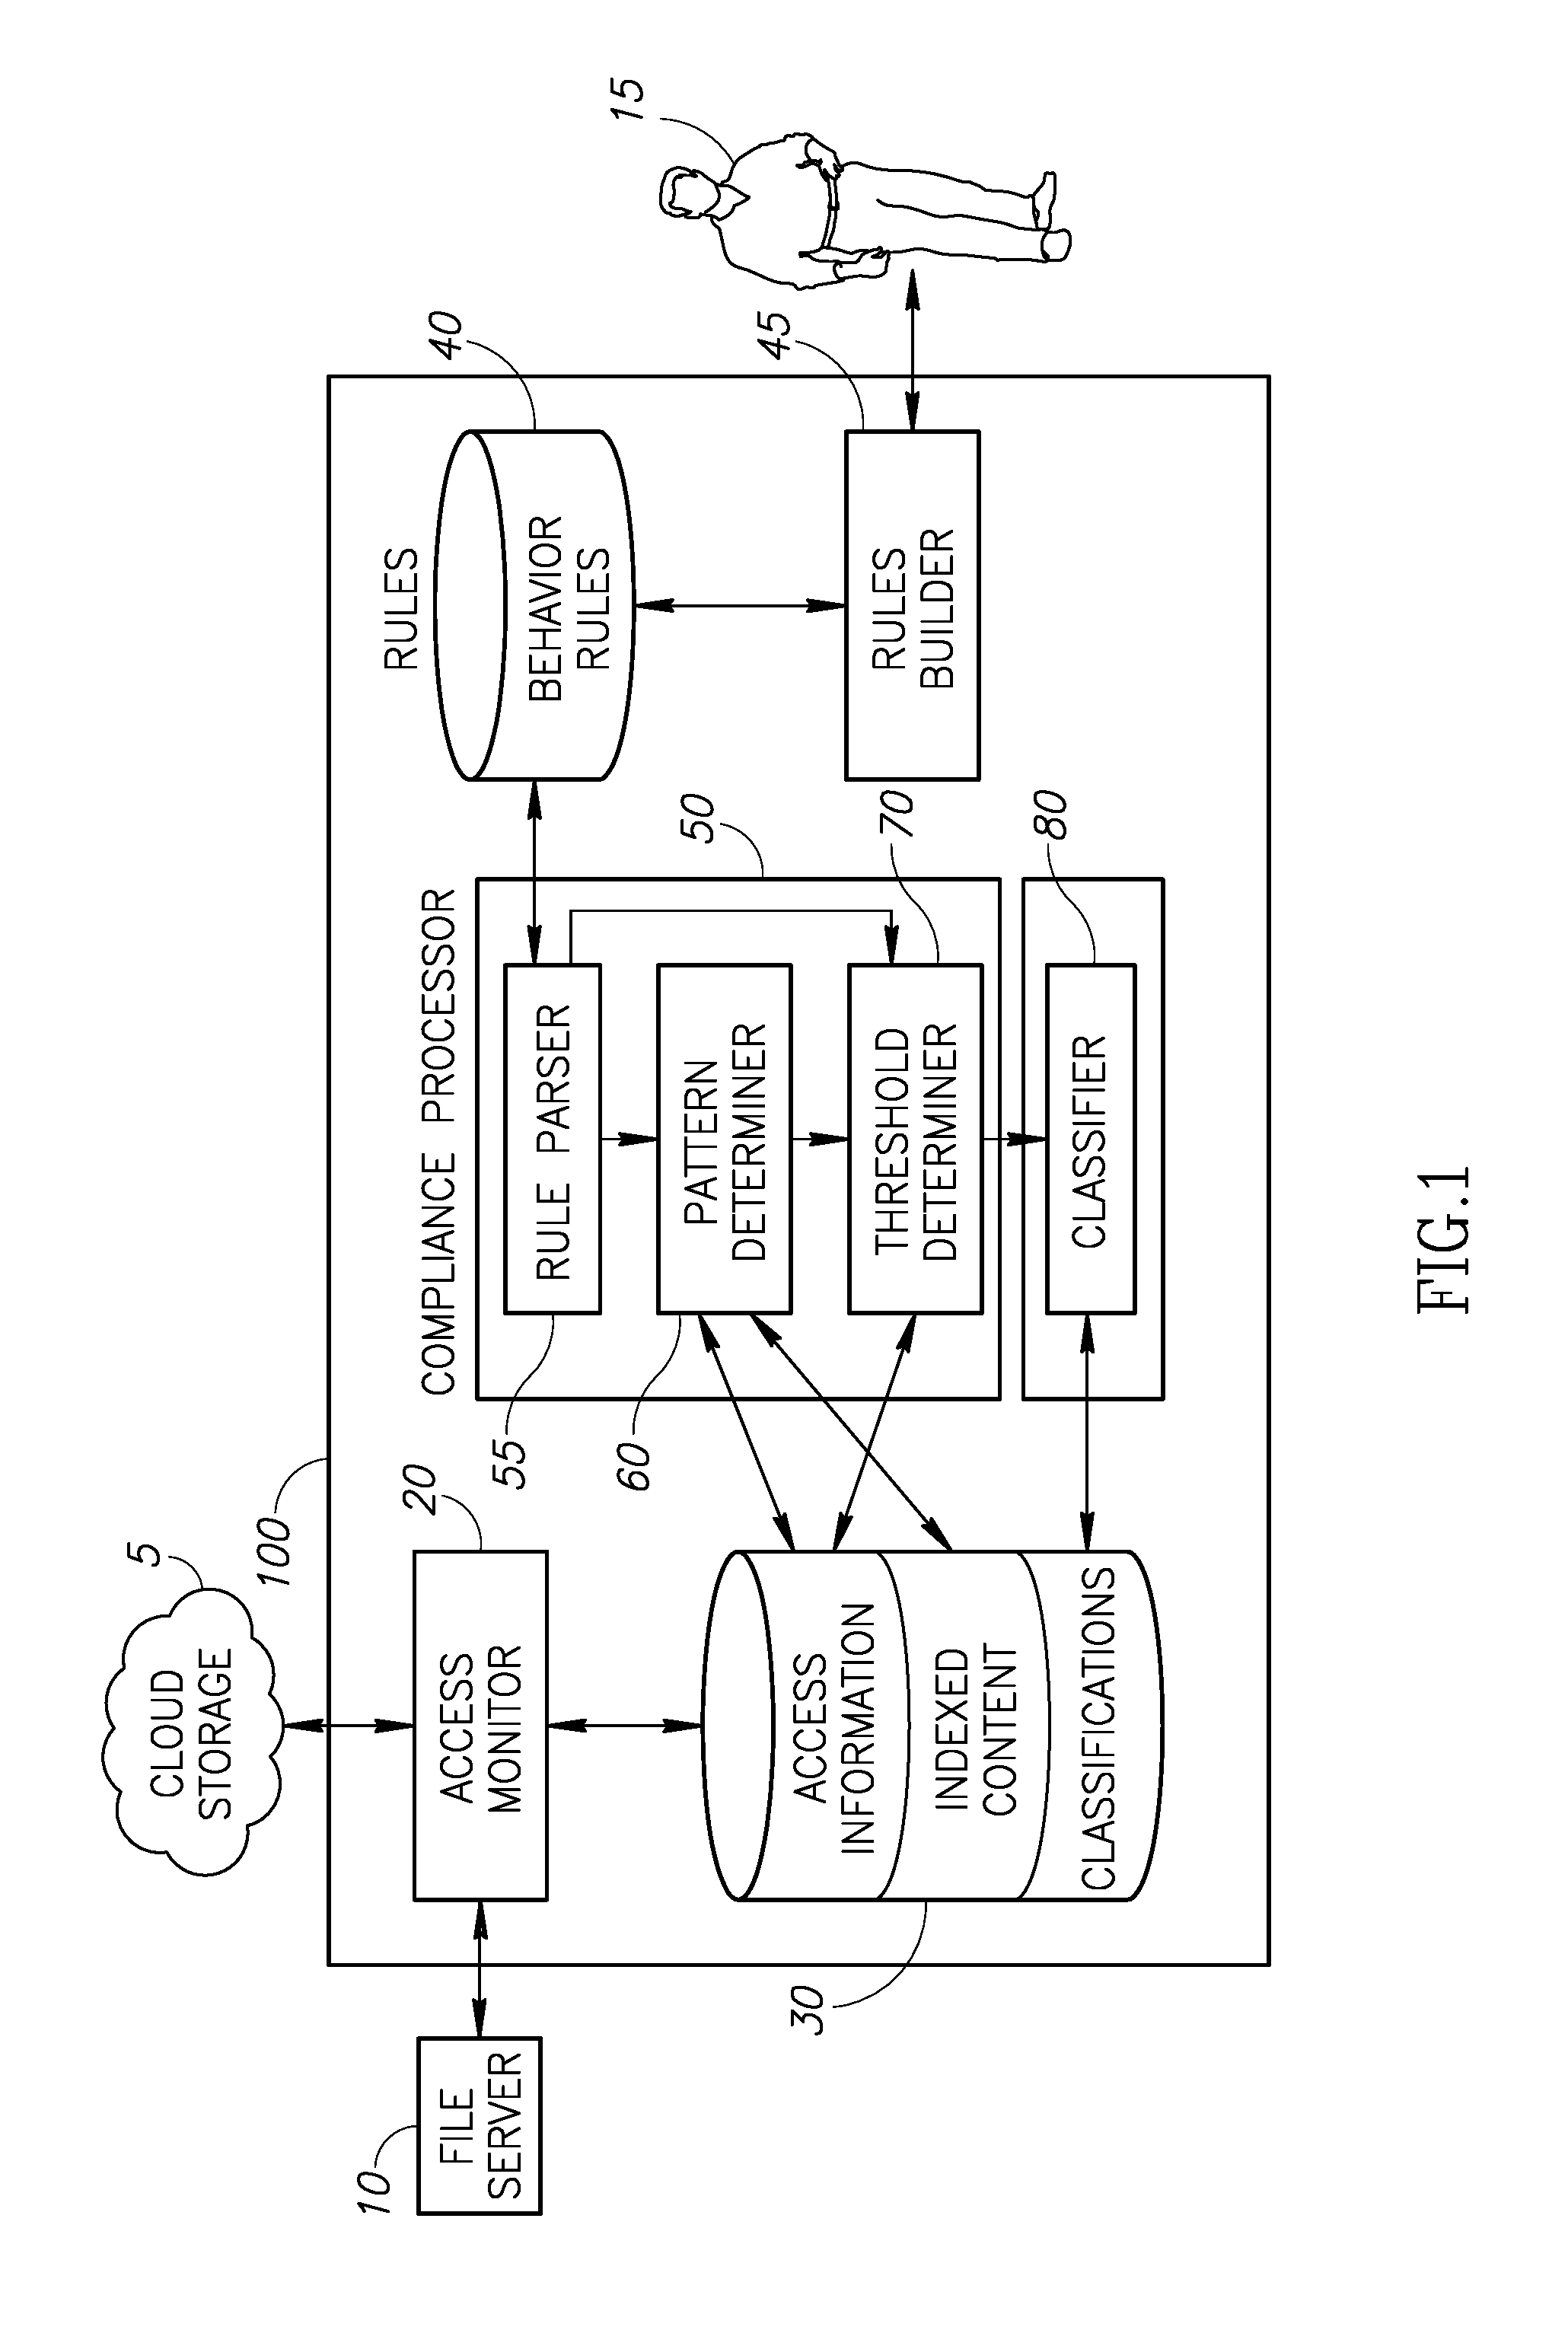 System and method for classifying documents based on access